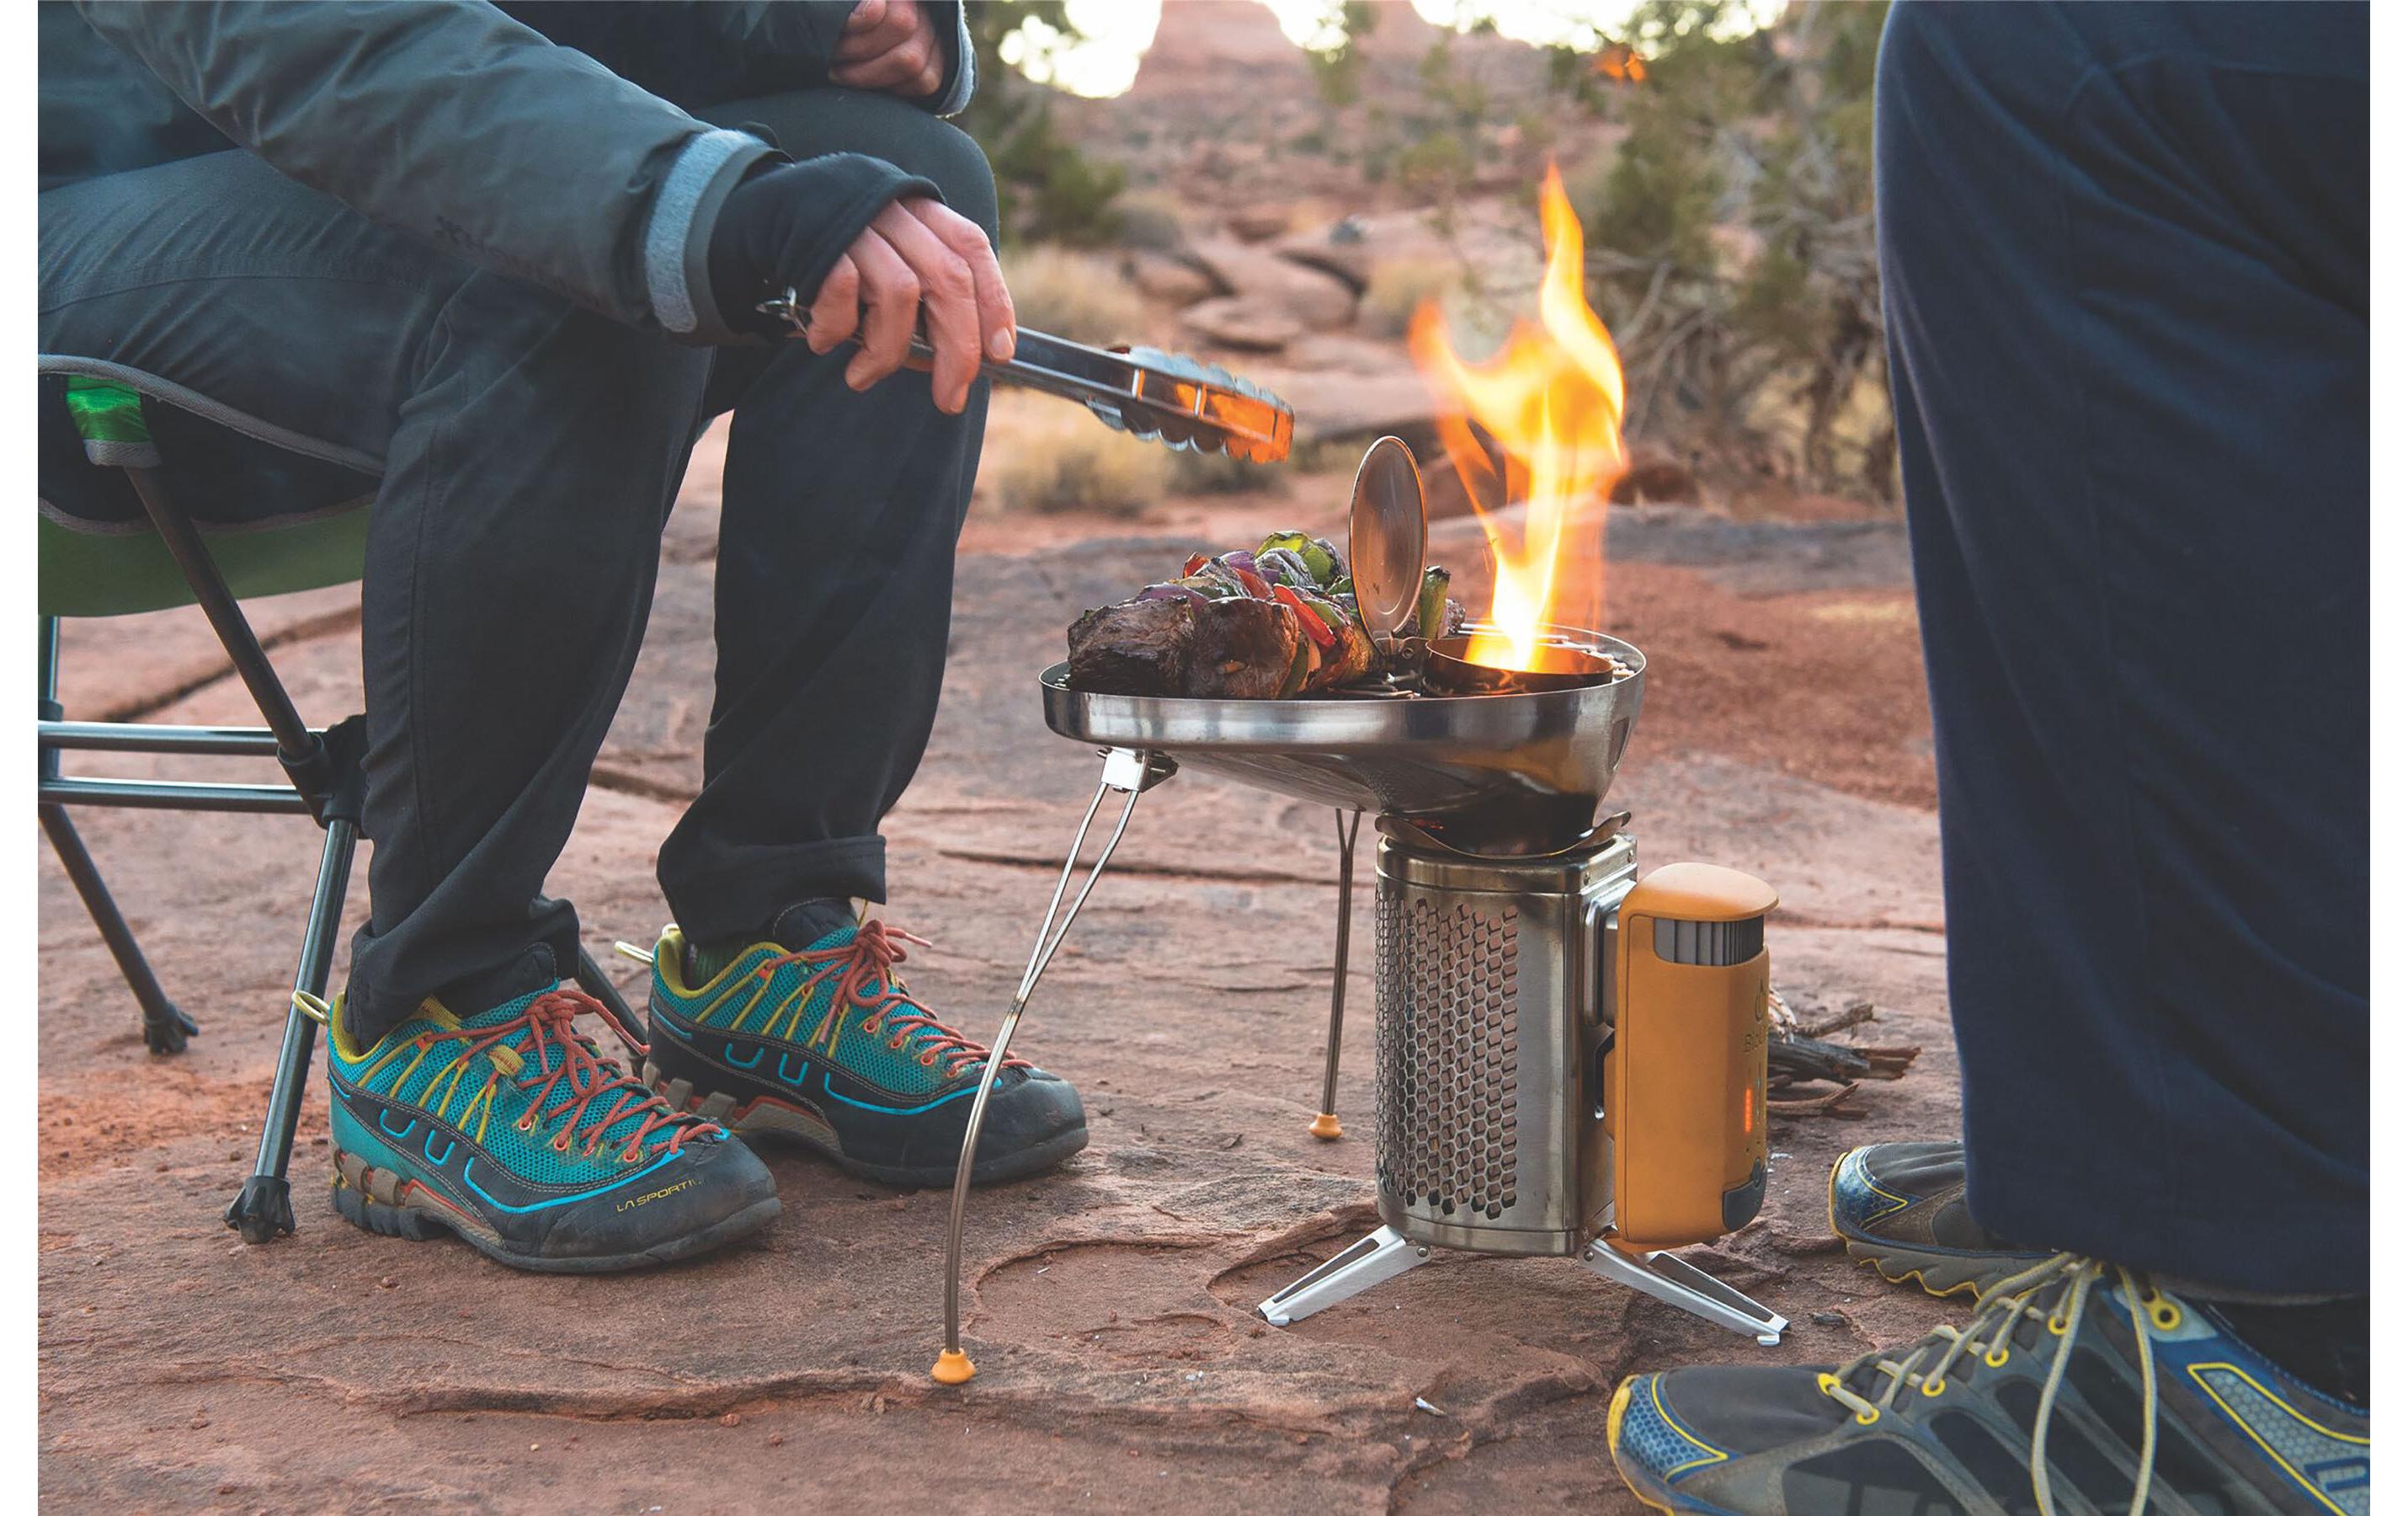 BioLite Camping-Grill Campstove Complete Kit